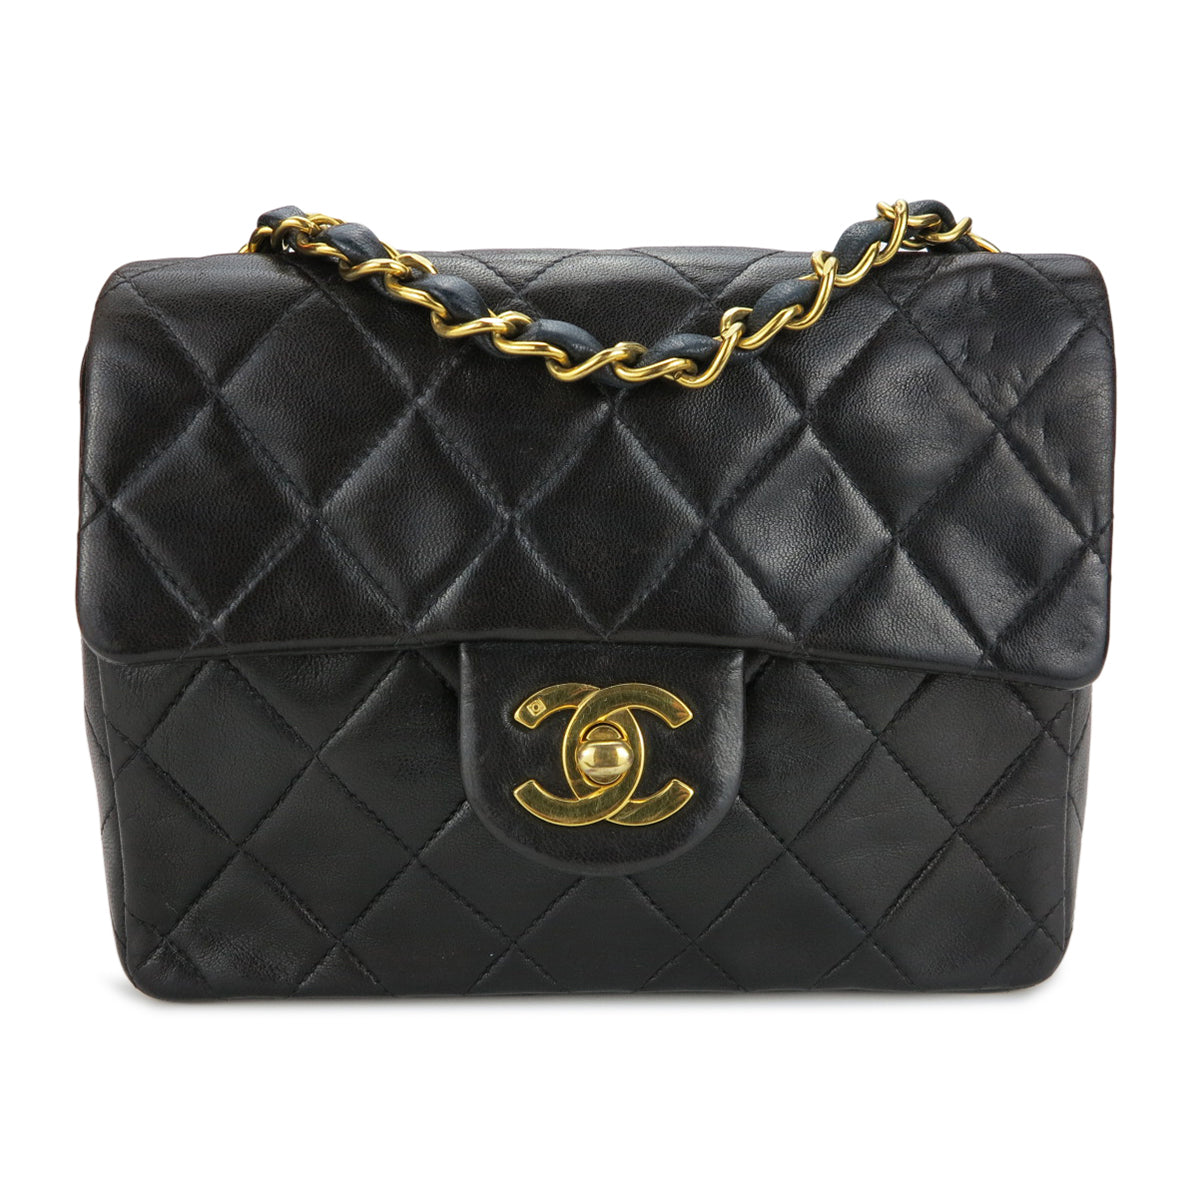 Chanel Lambskin Classic Mini Flap With Gold Chain Shoulder Bag